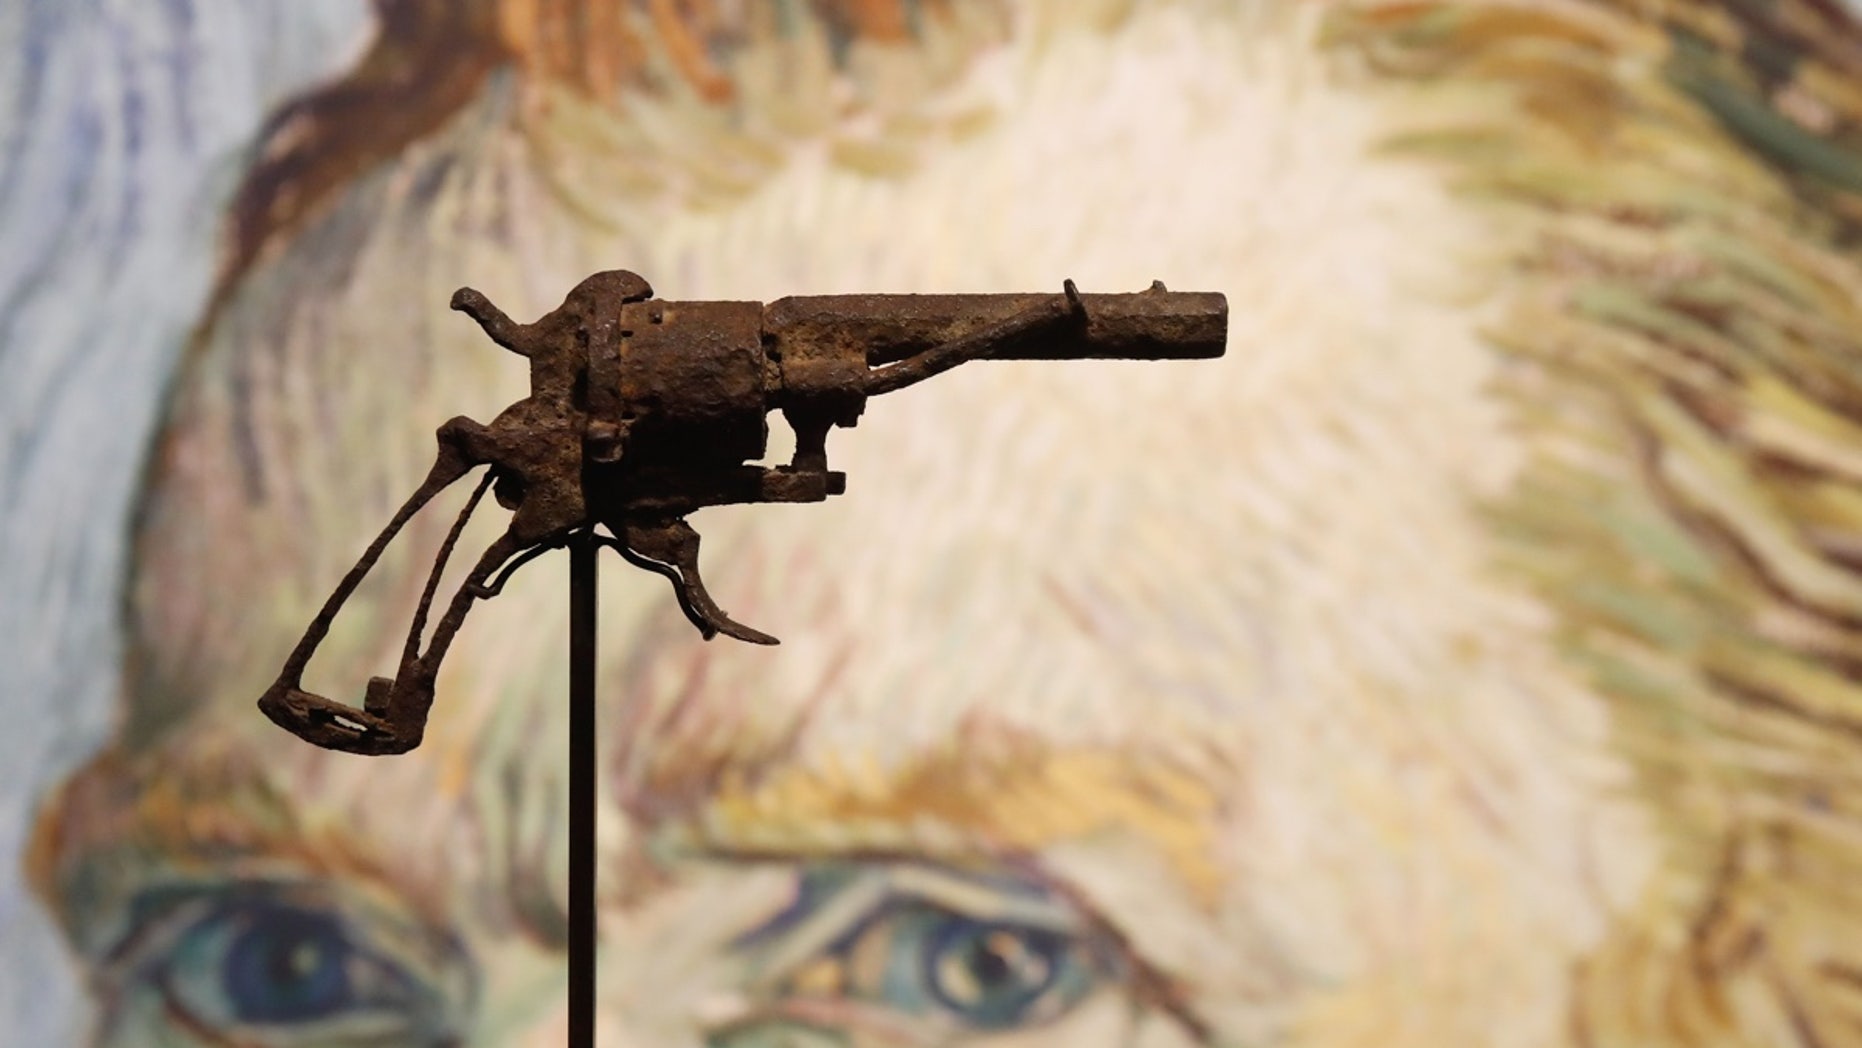 The pistol thought to be the one used by Van Gogh to shoot himself is on public display at Paris' Drouot auction house.